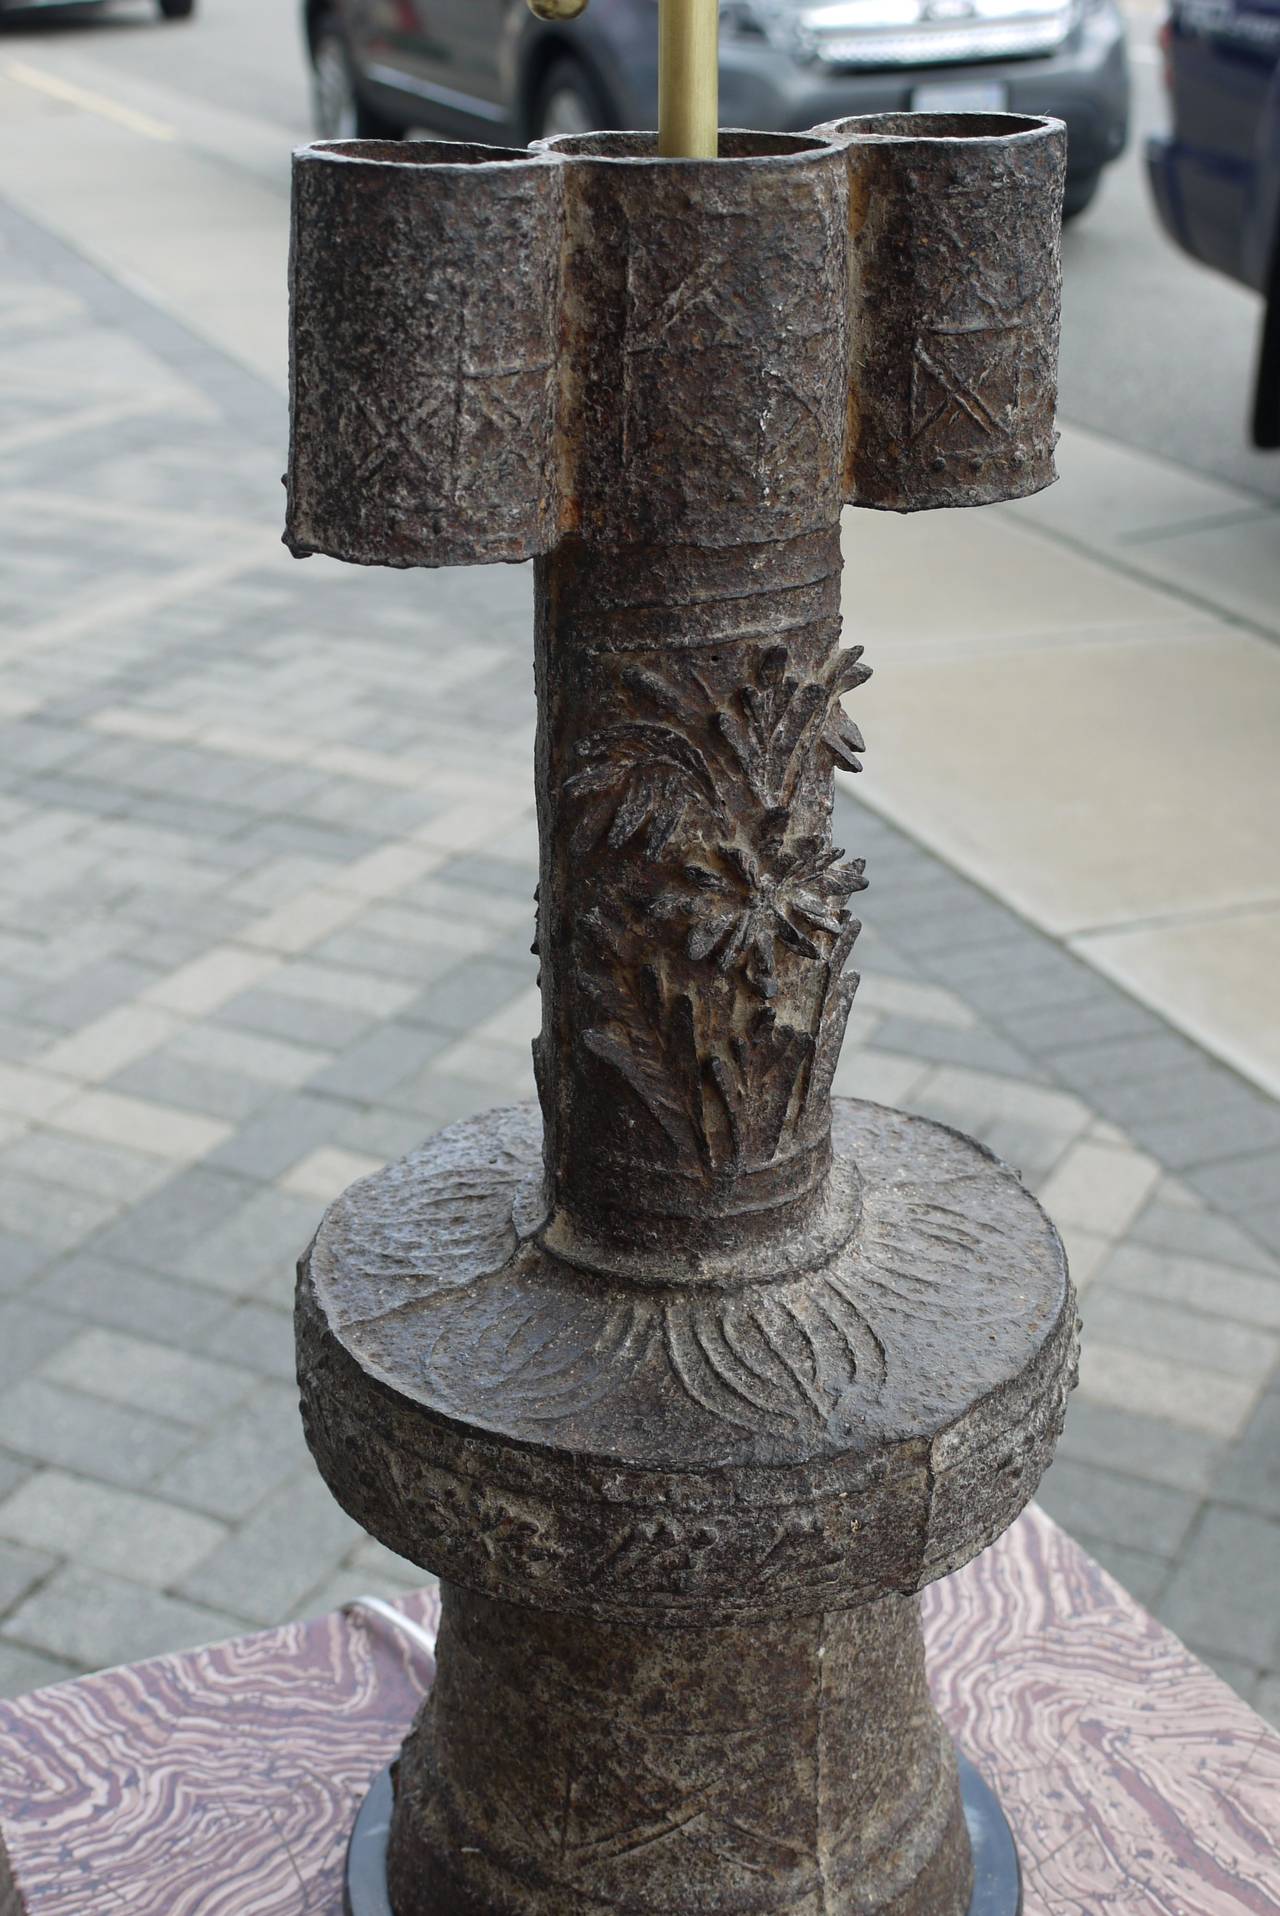 Sophisticated cast iron lamp made from a Ming Dynasty arrow vase. Arrow vases were originally made as part of a game where players tried to shoot arrows through the loops. A similar vase is in the British Museum(museum number 1982, 0213.1) lamp was